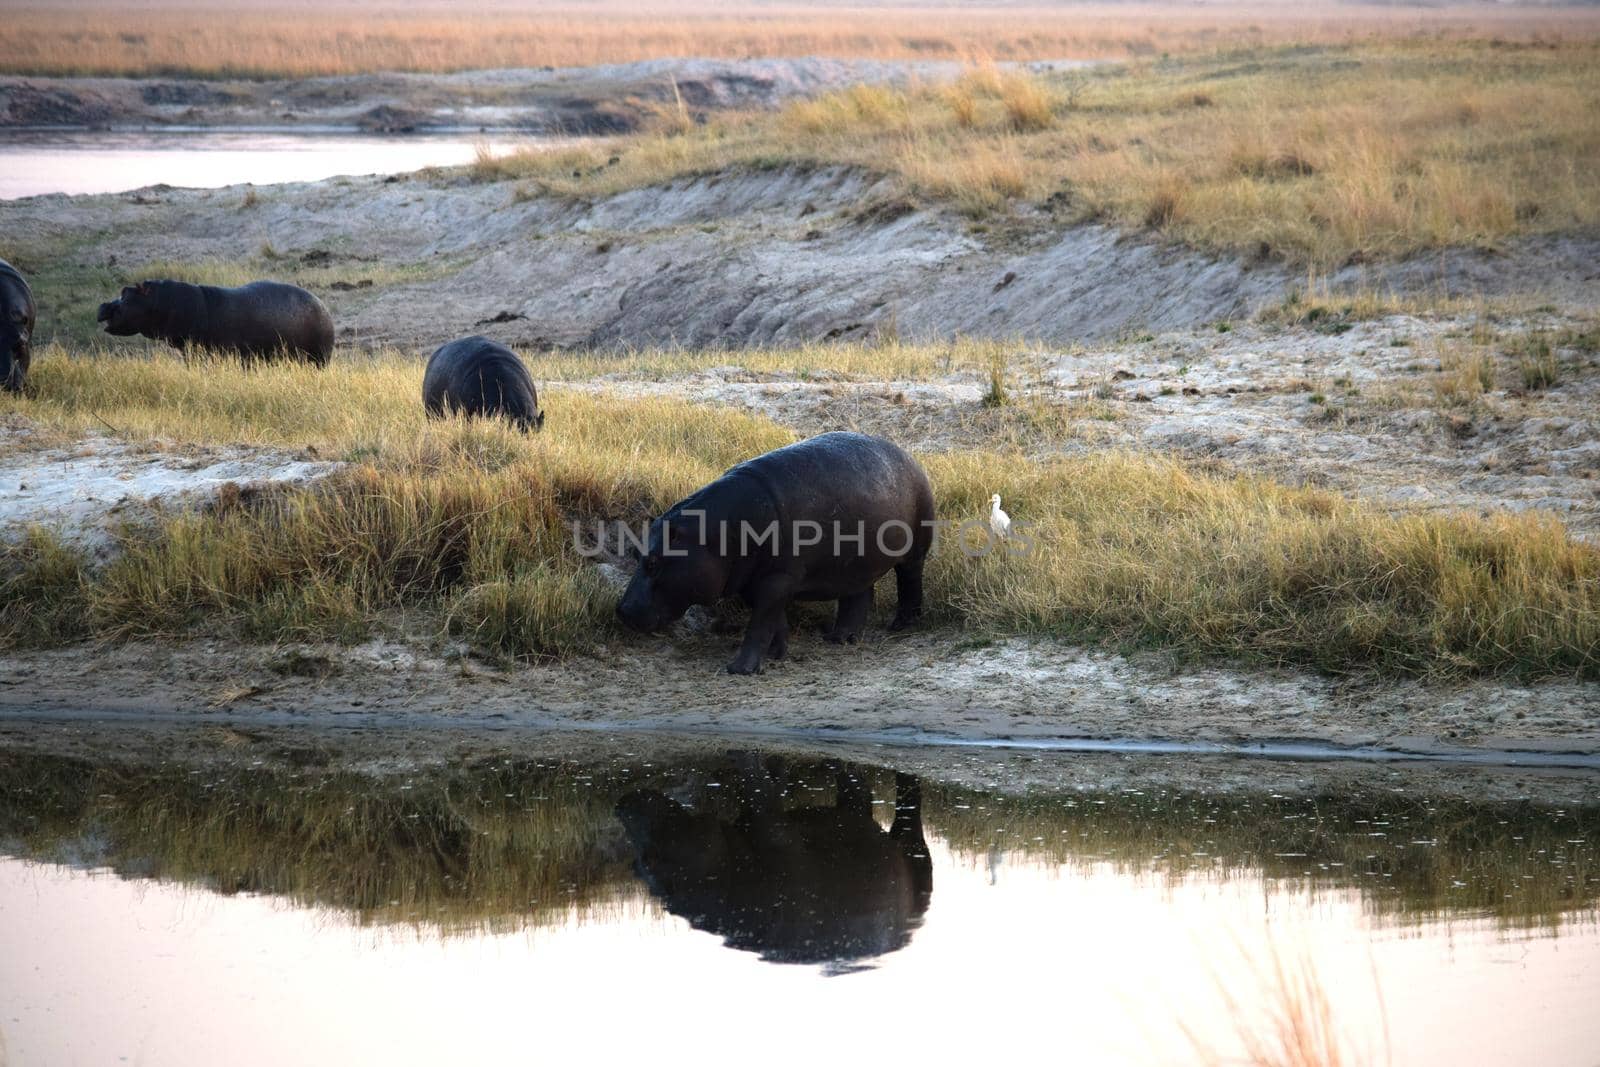 A huge hippopotamus reflected in the waters of the Chobe River, Botswana